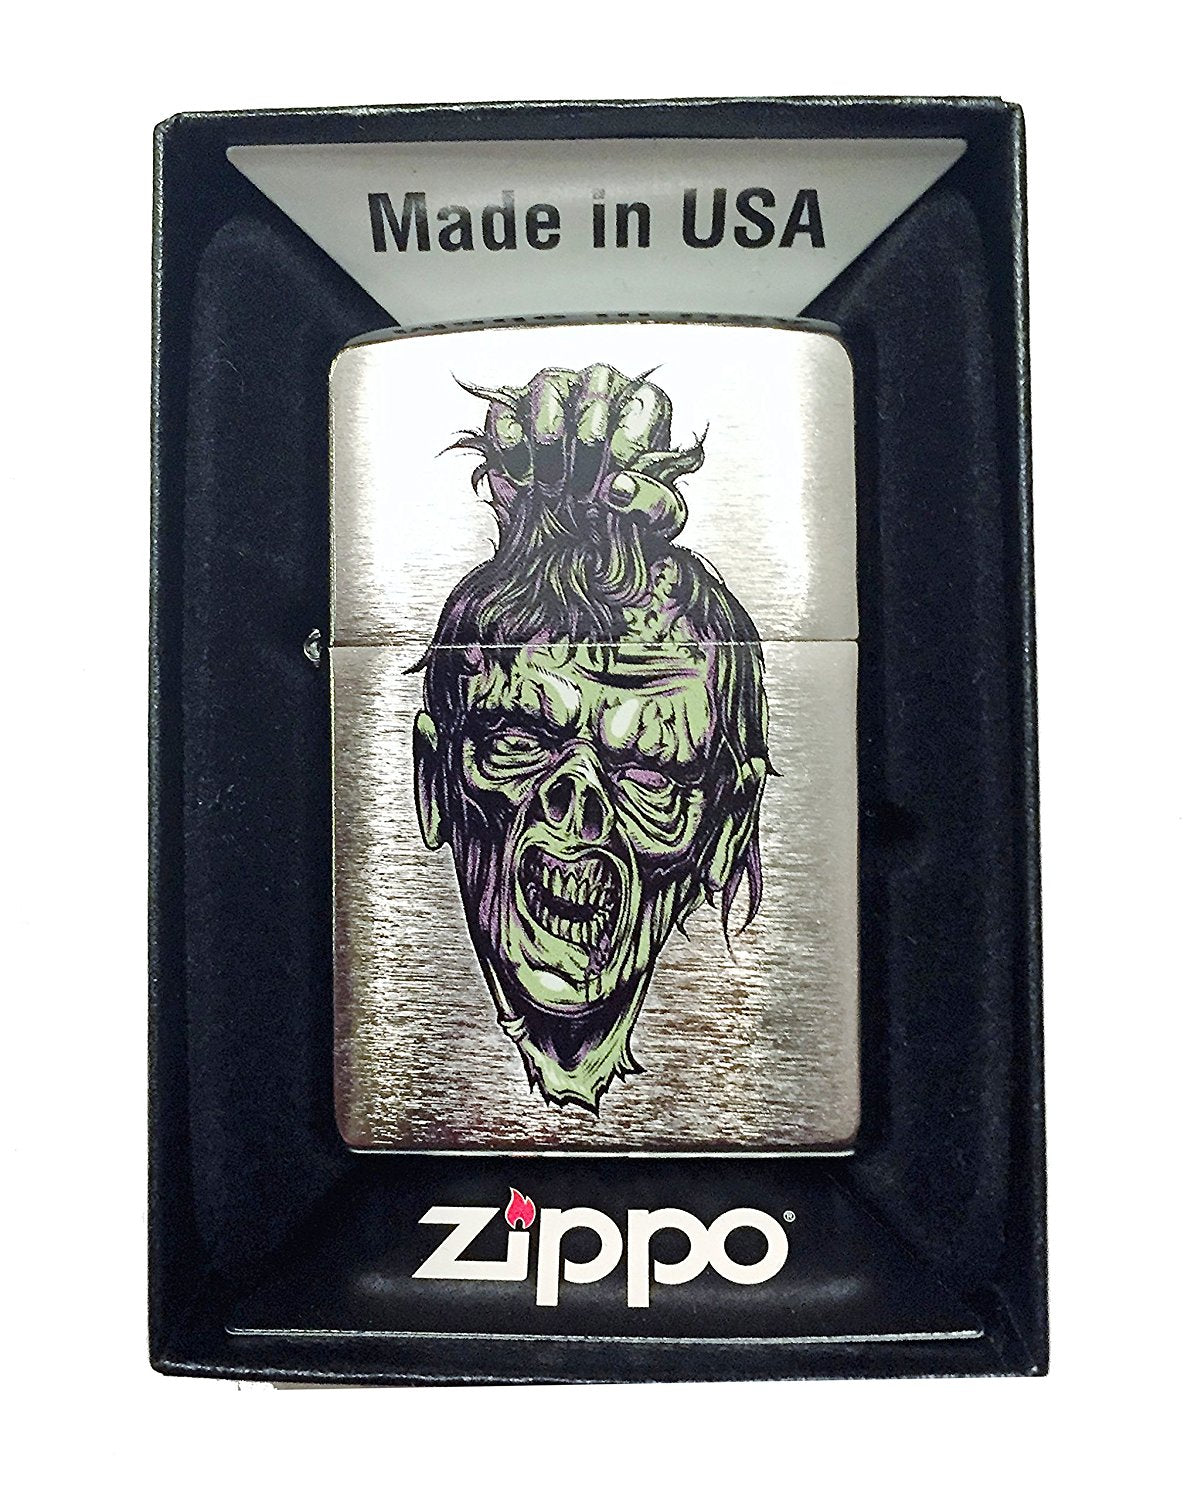 Zombie Holding Head by Hair - Brushed Chrome Zippo Lighter